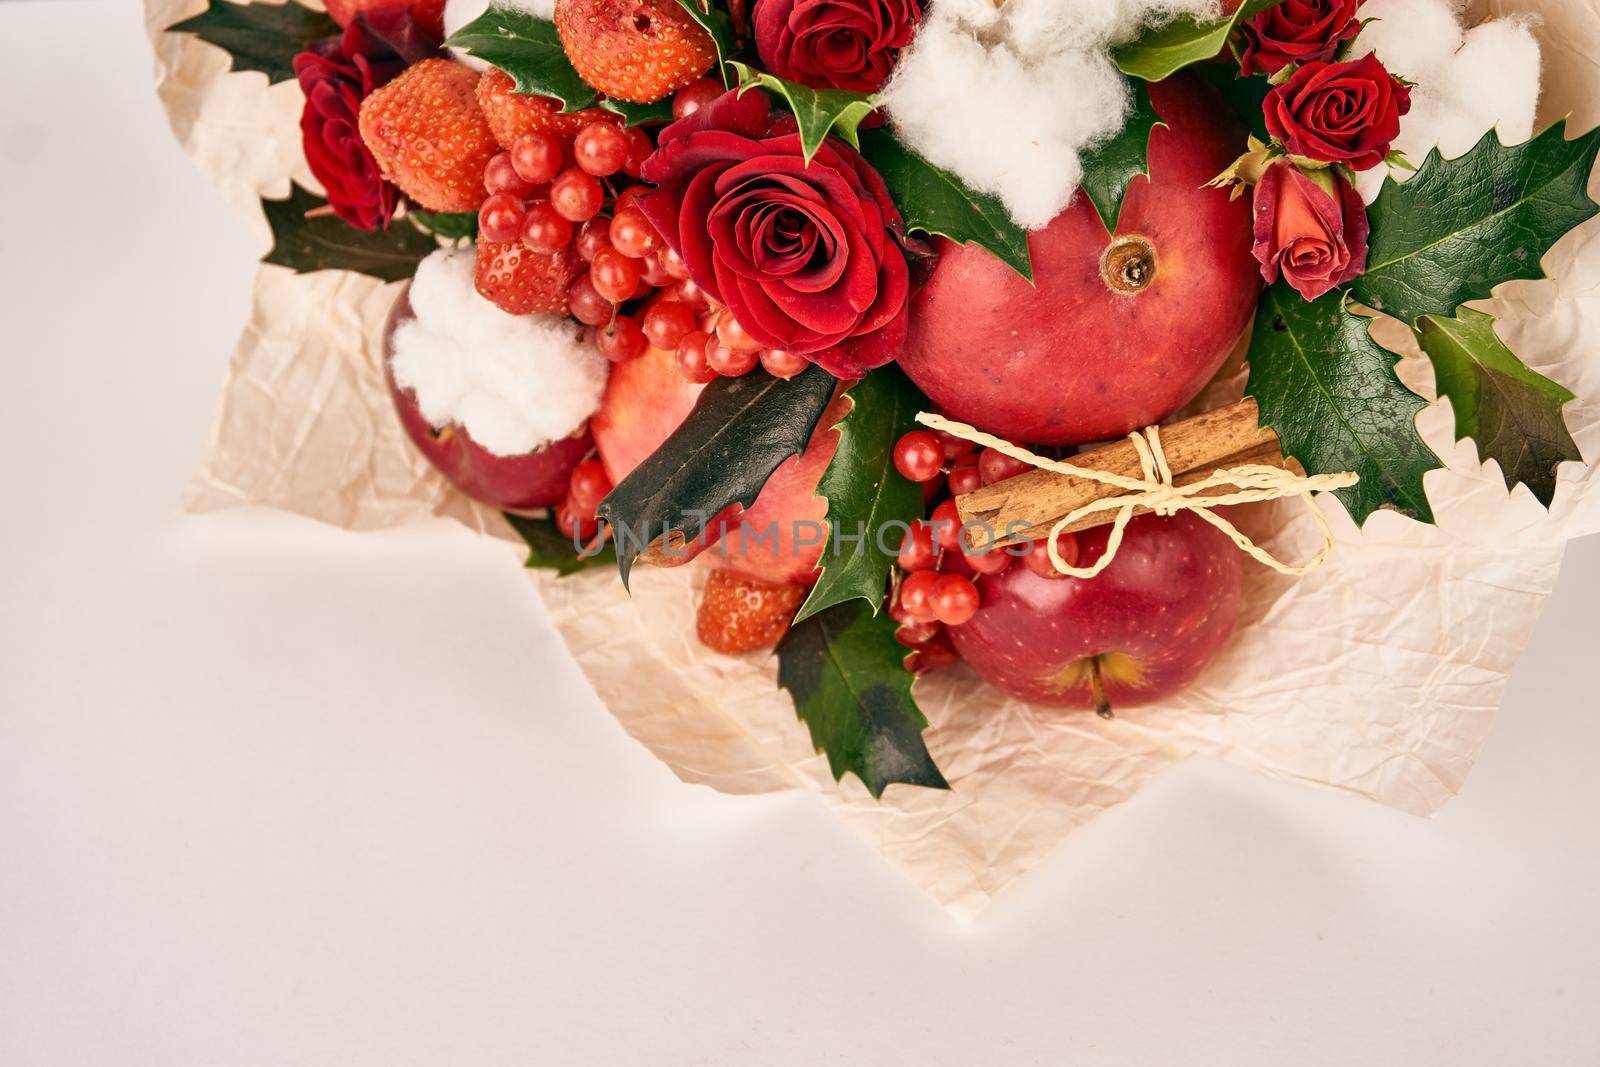 bouquet with red fruits cinnamon decoration gift organic by Vichizh